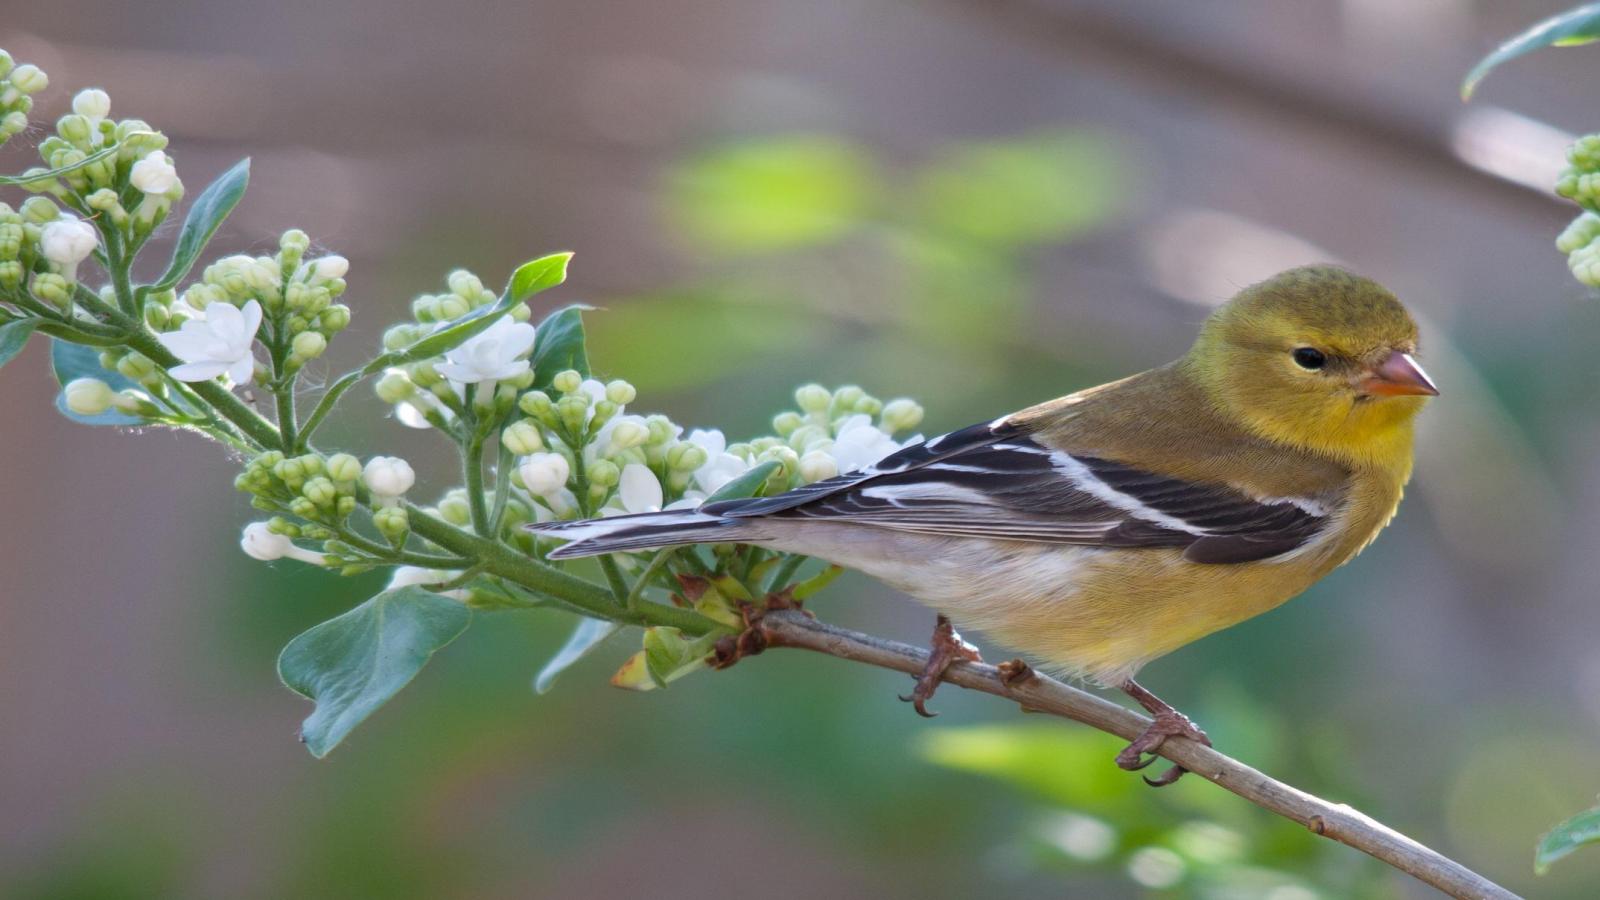 Goldfinch Bird Live In Pacific Northwest Midwest And Eastern States